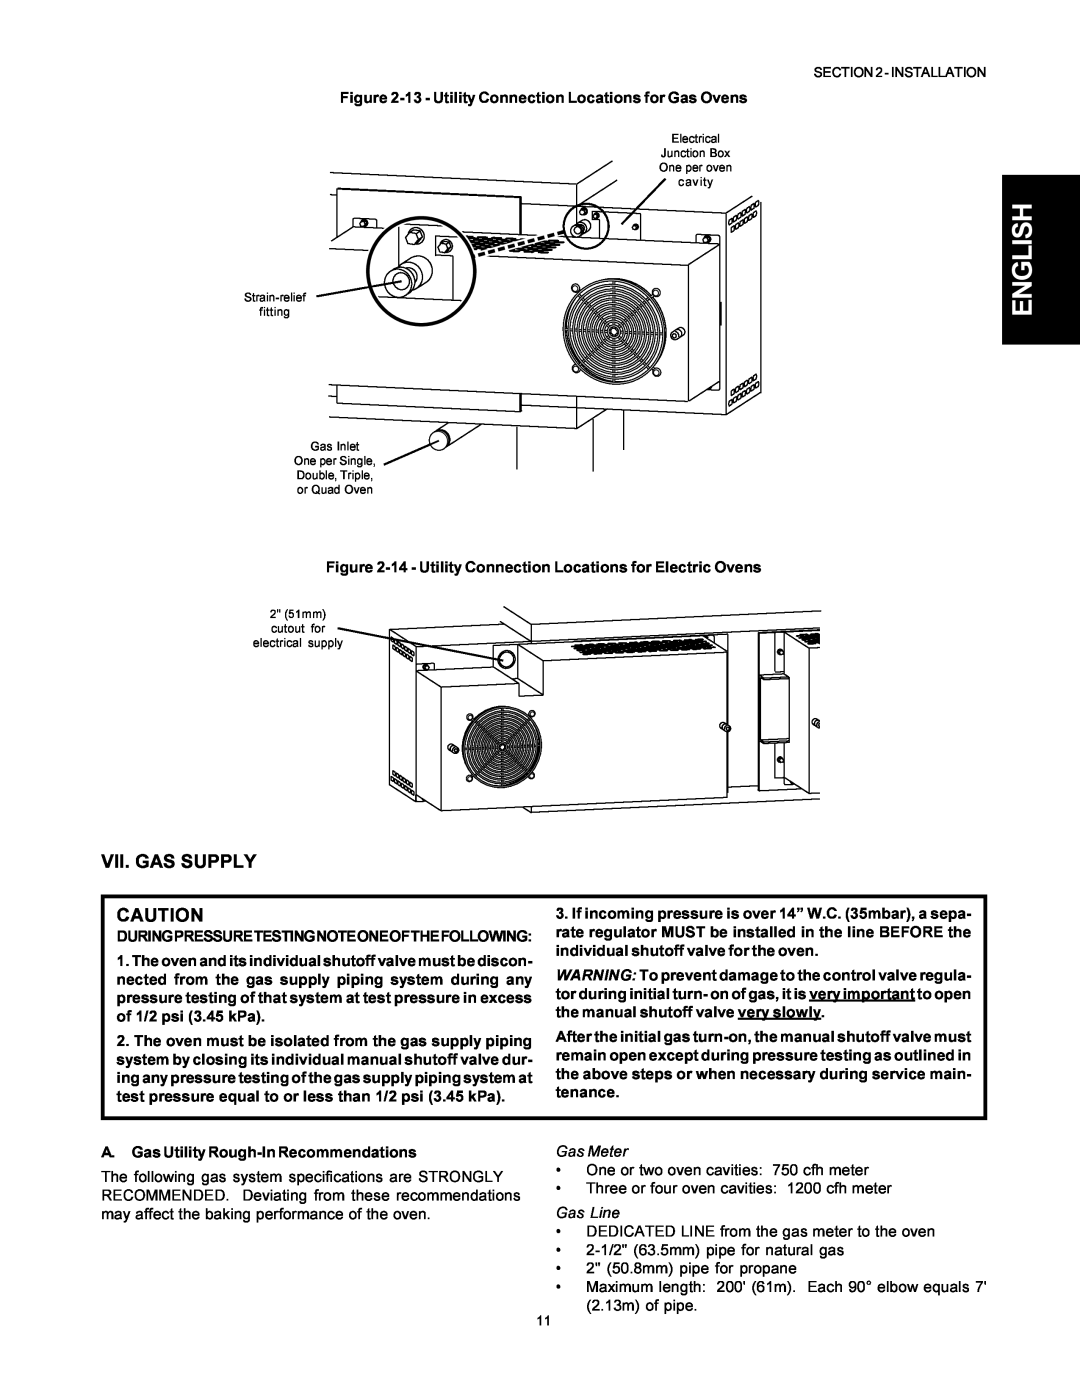 Middleby Marshall PS500 Vii. Gas Supply, English, 13 - Utility Connection Locations for Gas Ovens, of 1/2 psi 3.45 kPa 